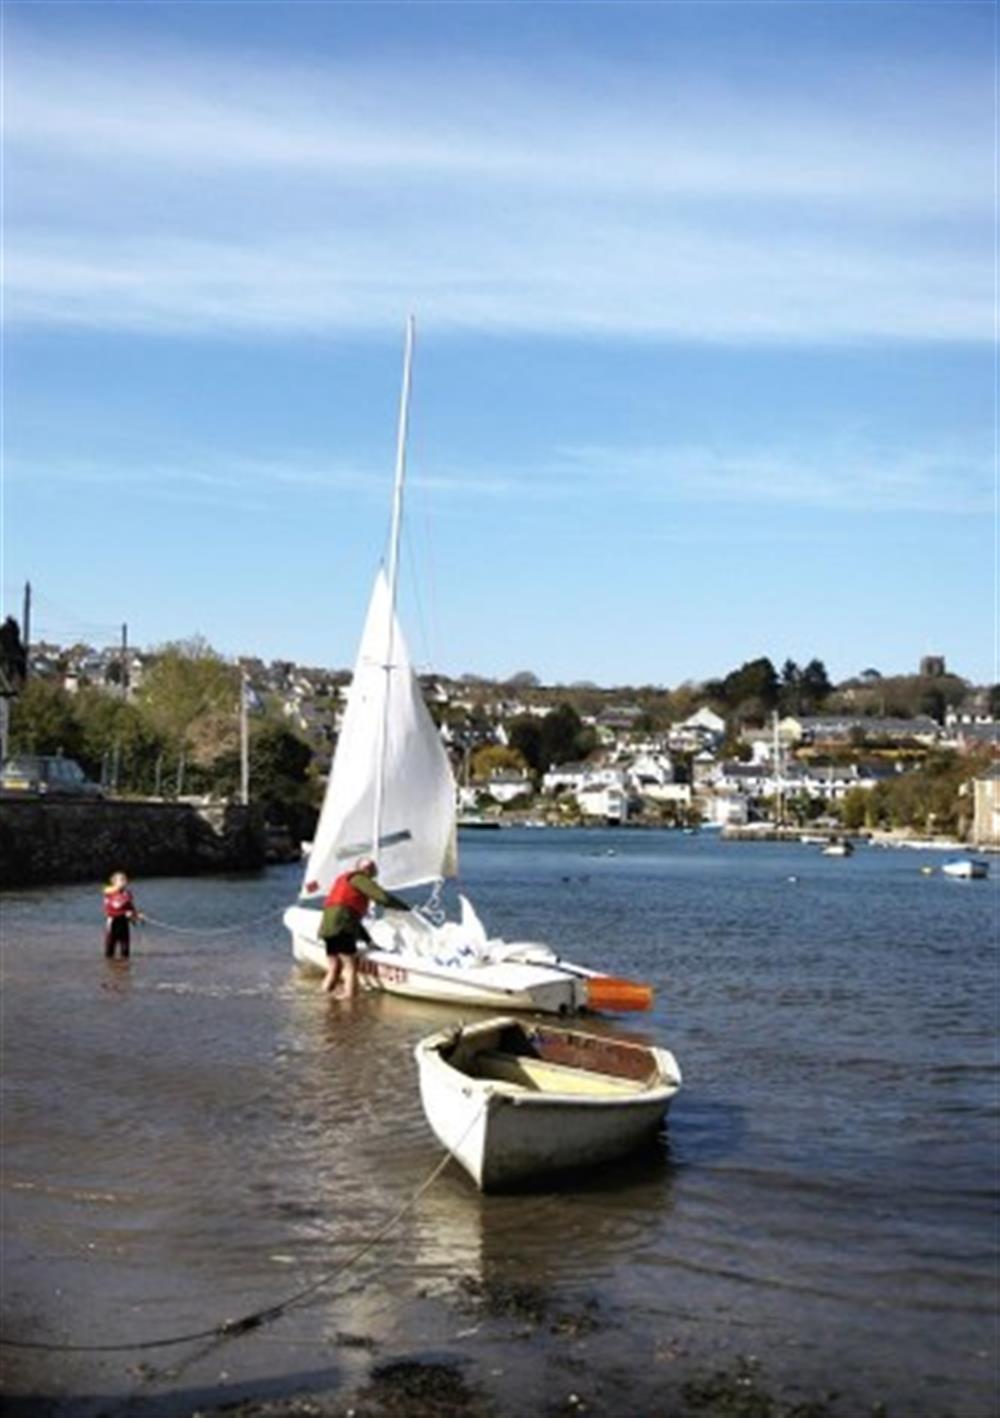 Noss Mayo, can be reached by car in 5 minutes at Revelstoke Park House in Noss Mayo